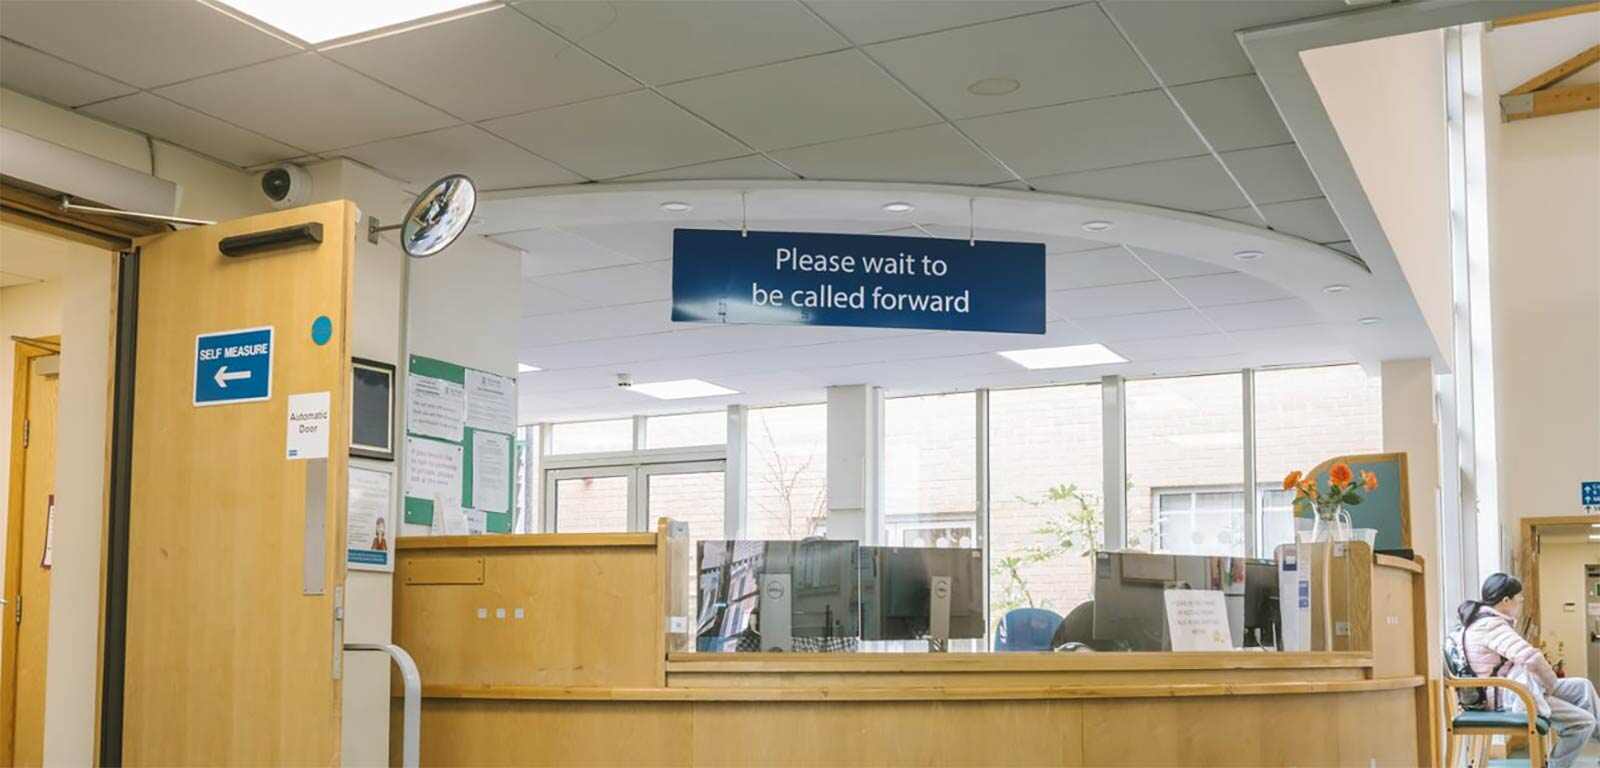 A reception desk at a doctors' clinic, with a sign saying "Please wait to be called forward" hanging overhead